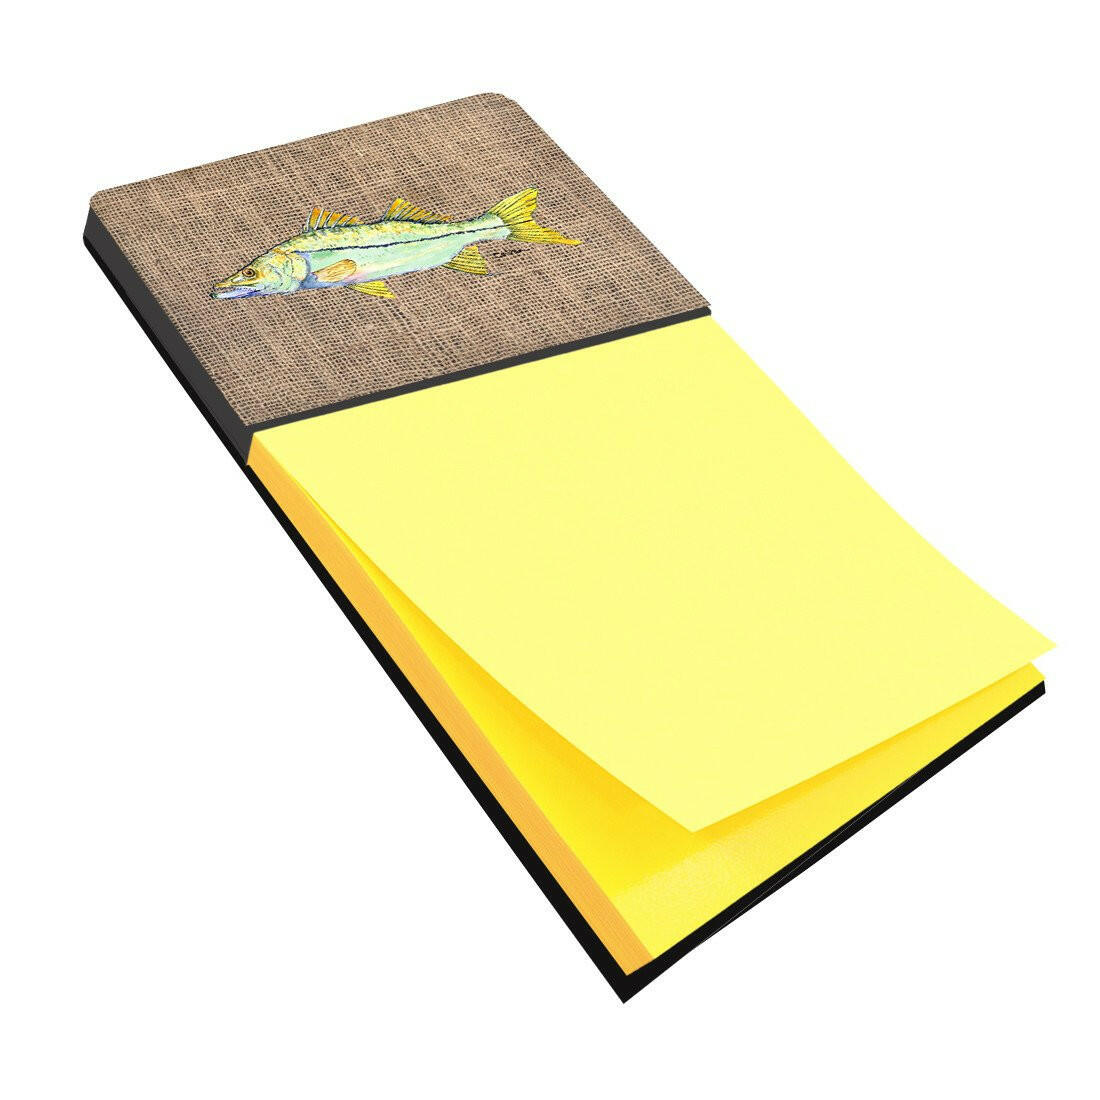 Fish - Snook Refiillable Sticky Note Holder or Postit Note Dispenser 8772SN by Caroline's Treasures